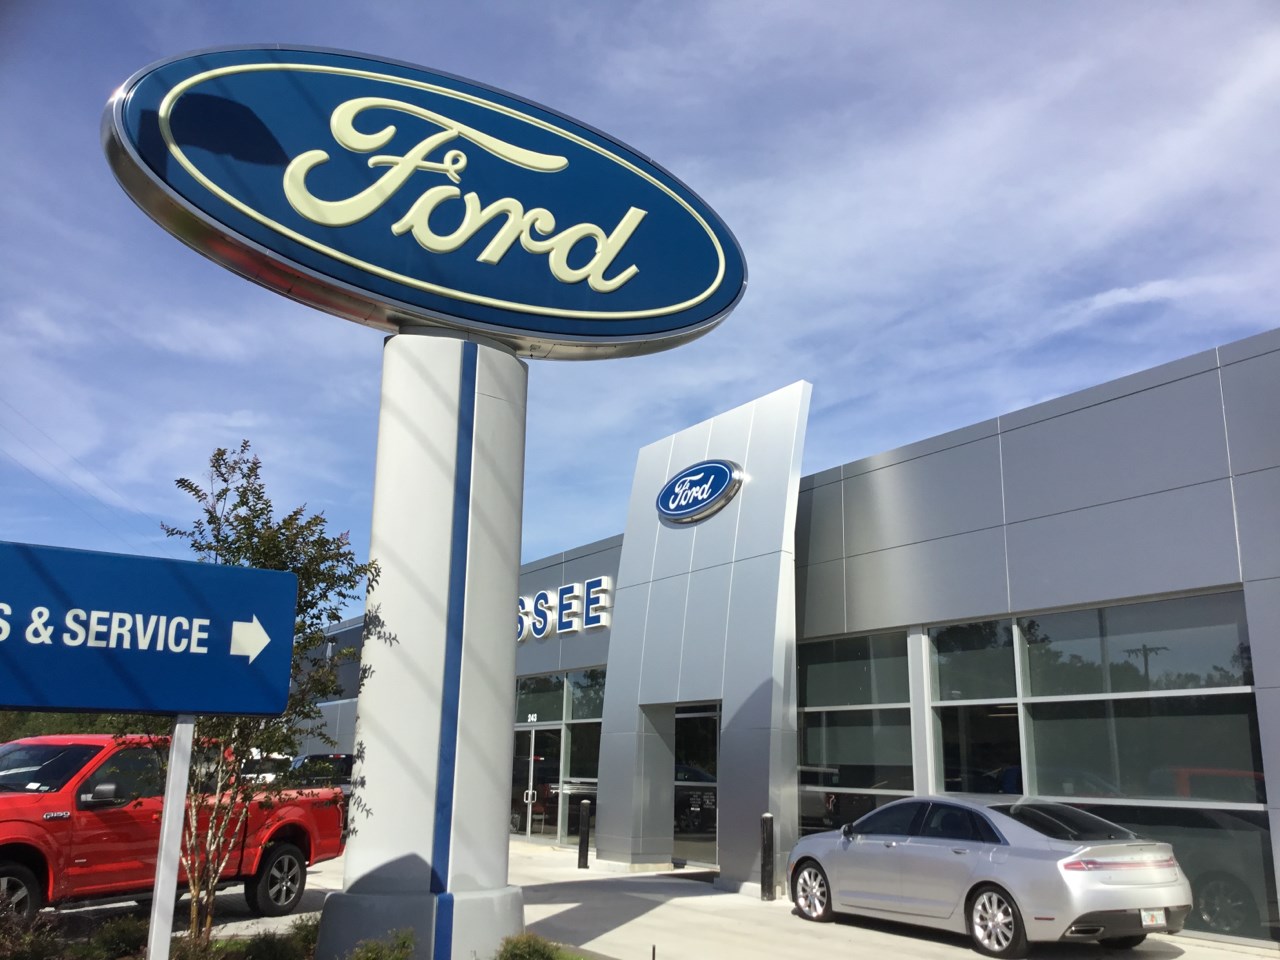 Tallahassee Ford Lincoln Exterior